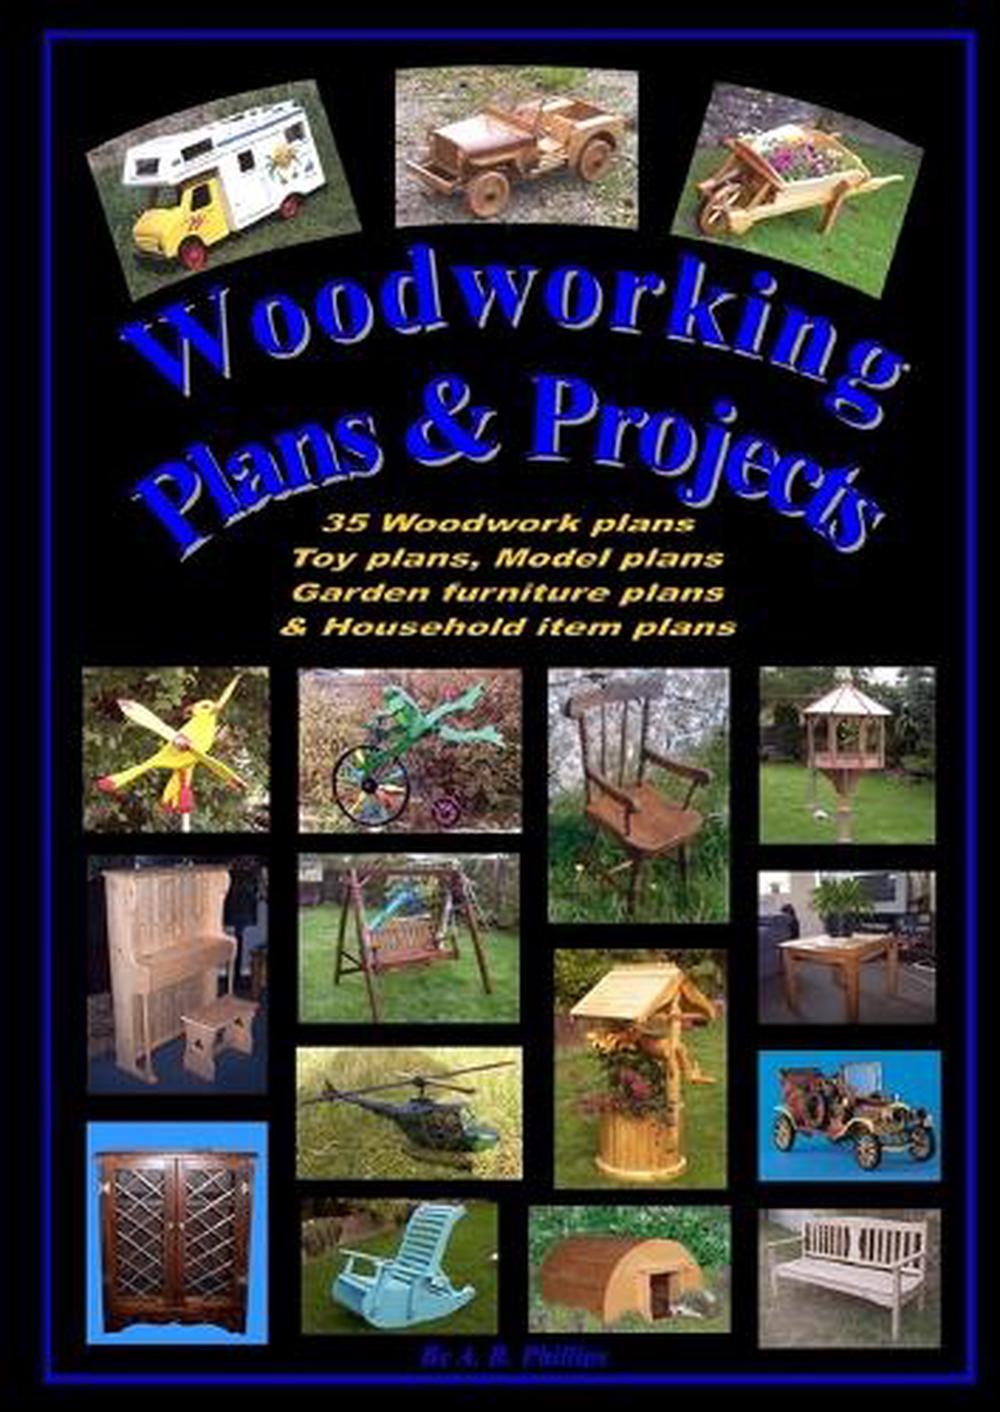 Woodworking Plans and Projects by Andrew R. Phillips 